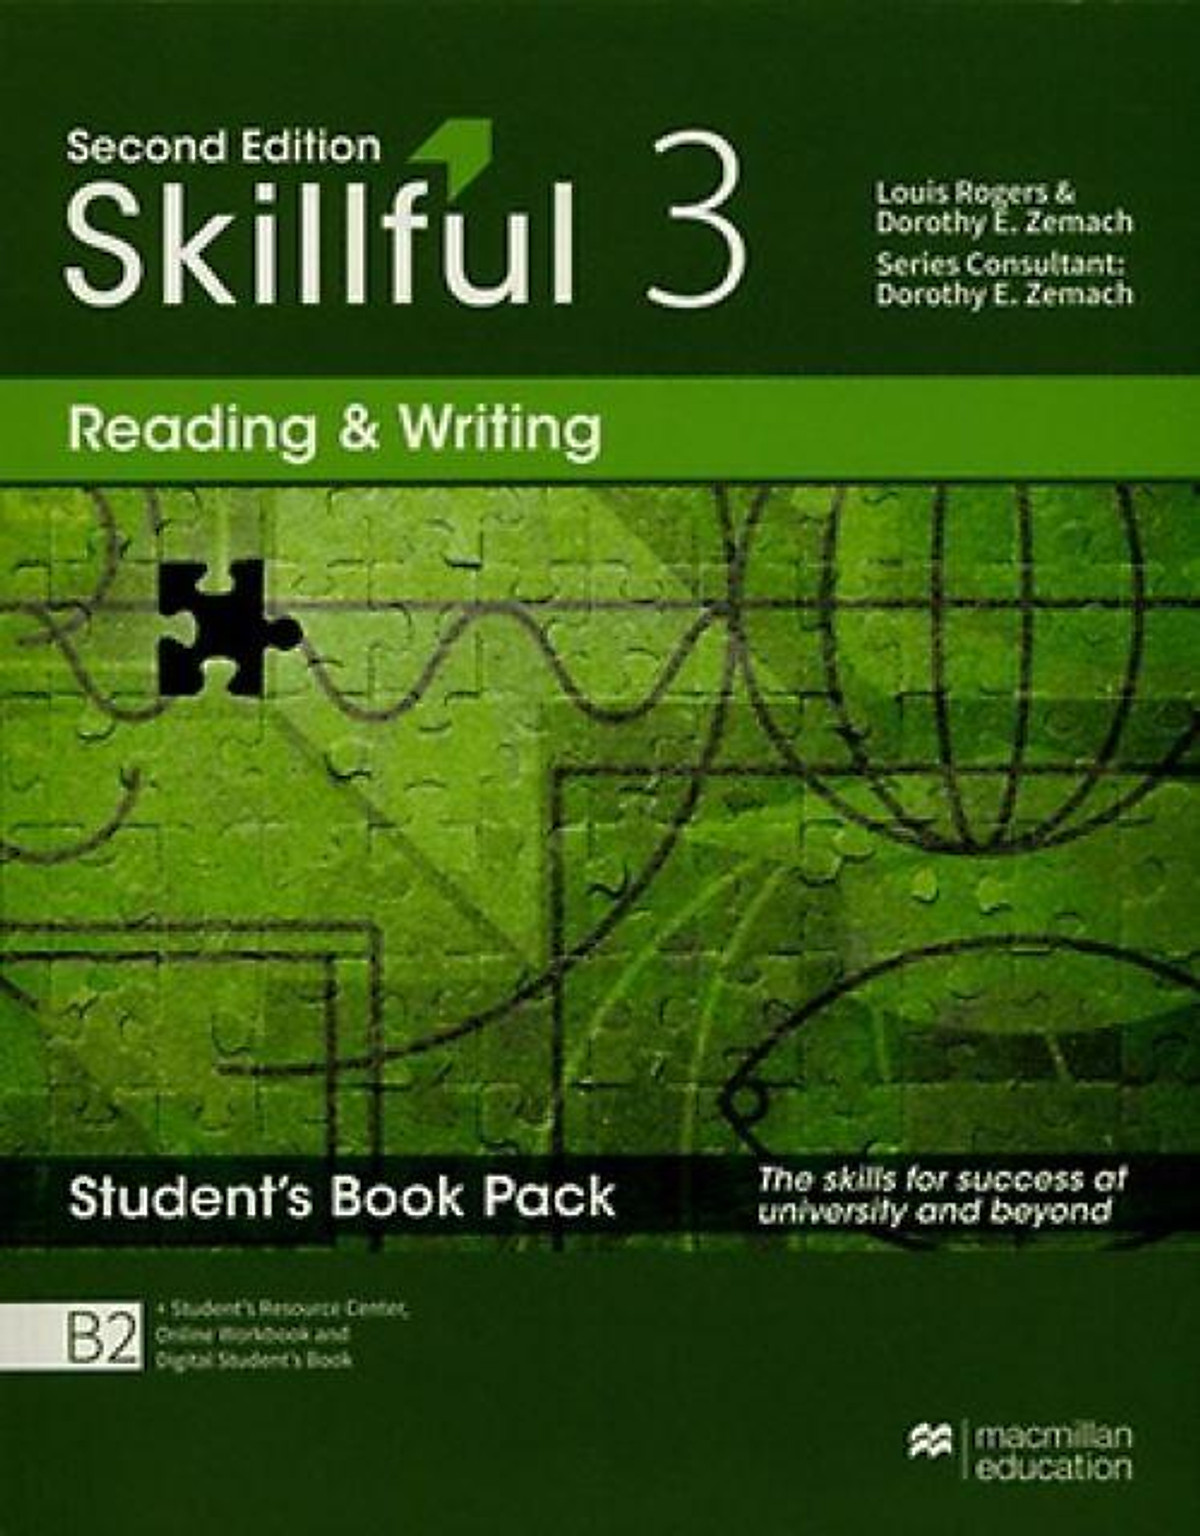 Skillful Second Edition Level 3 Reading & Writing Student's Book + Digital Student's Book Pack